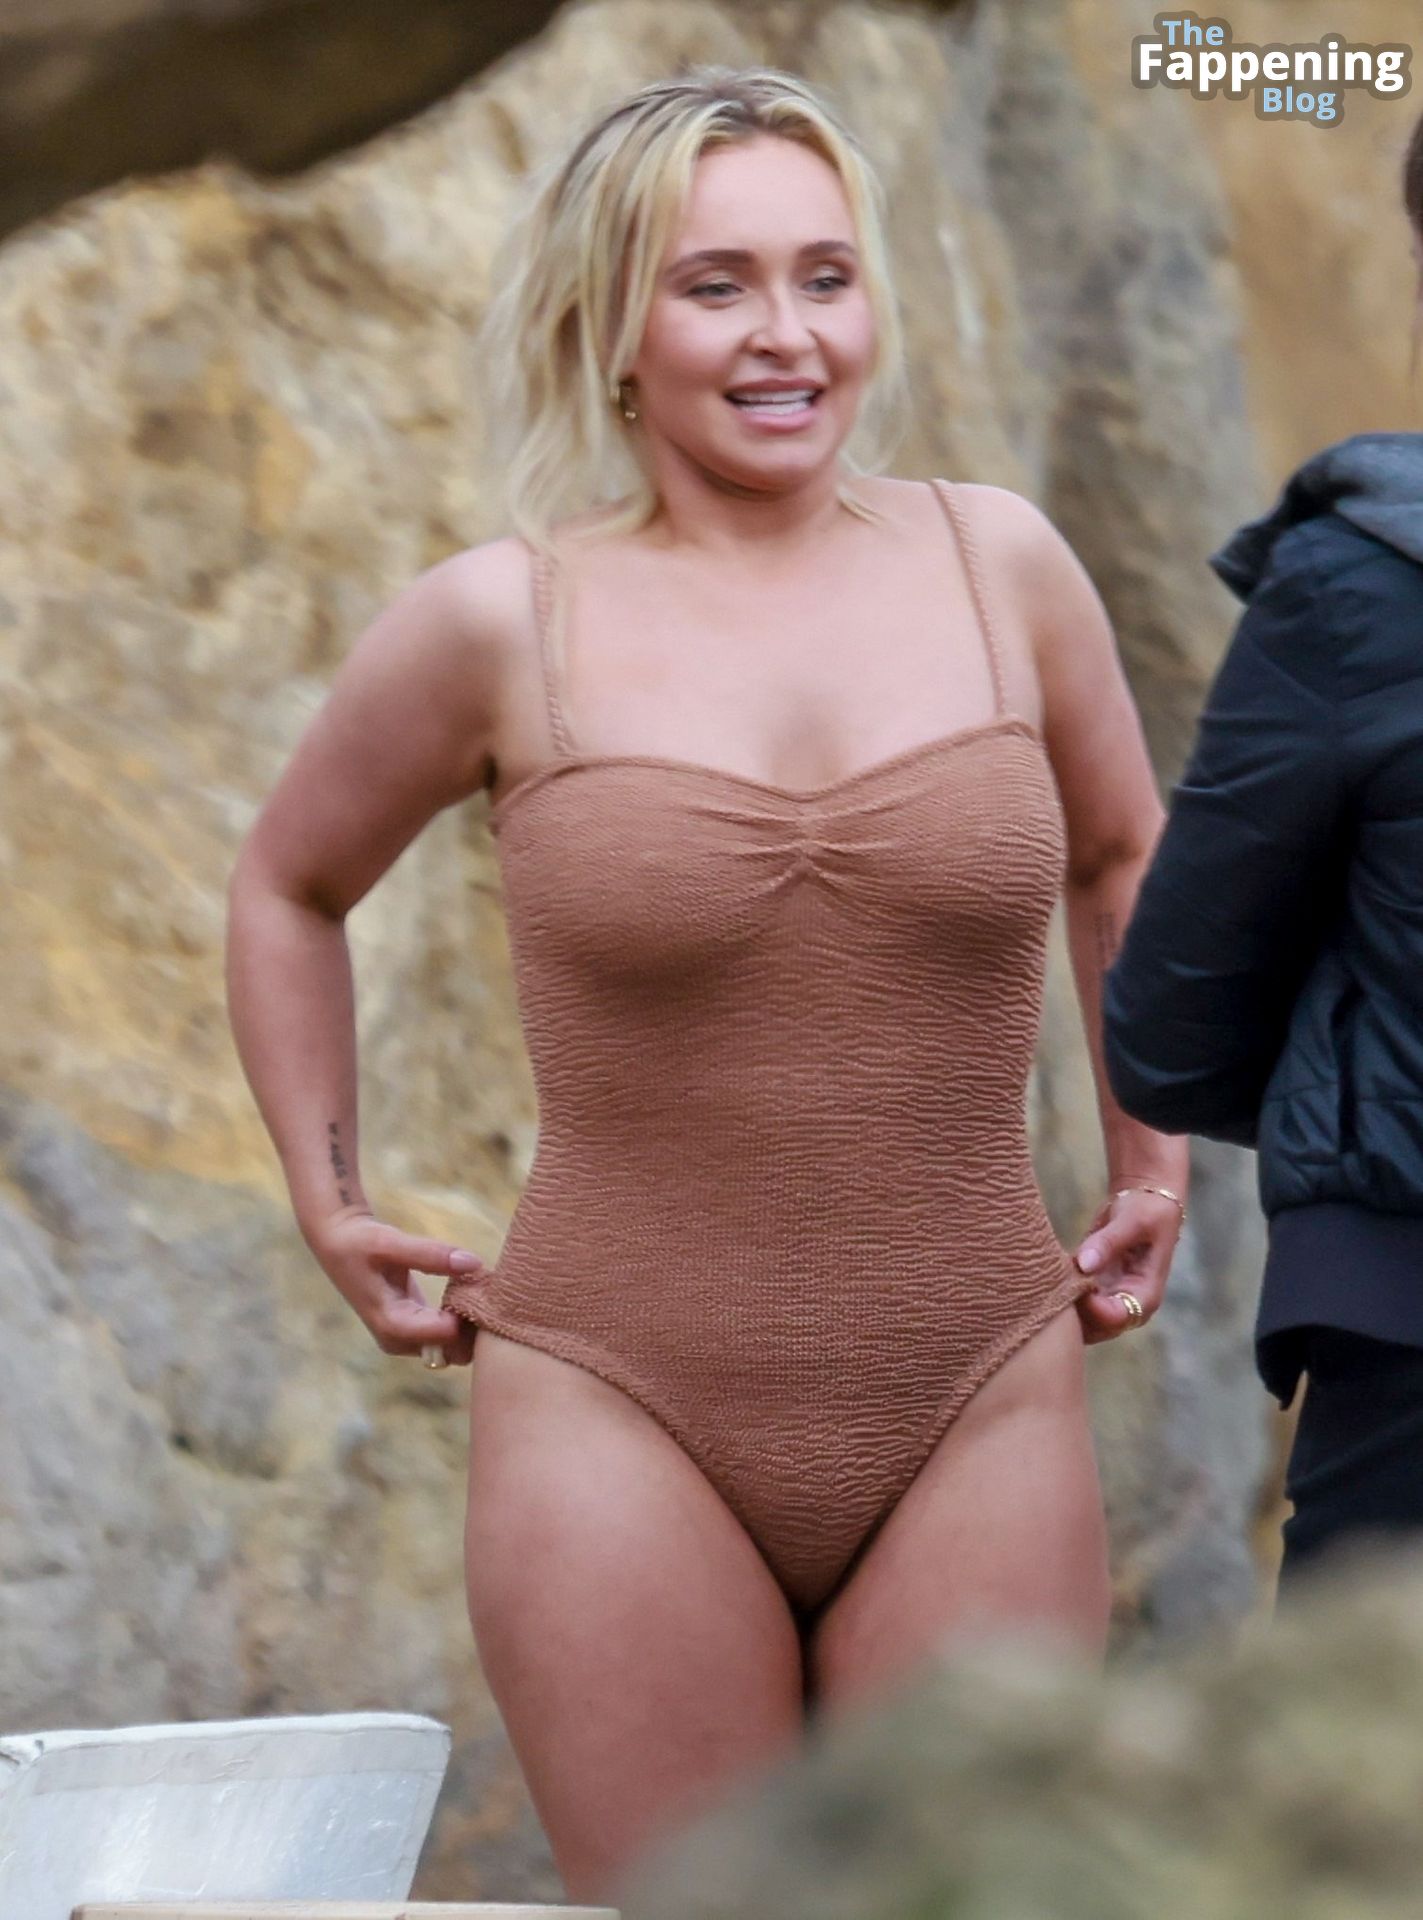 Hayden-Panettiere-Sexy-The-Fappening-Blog-63.jpg